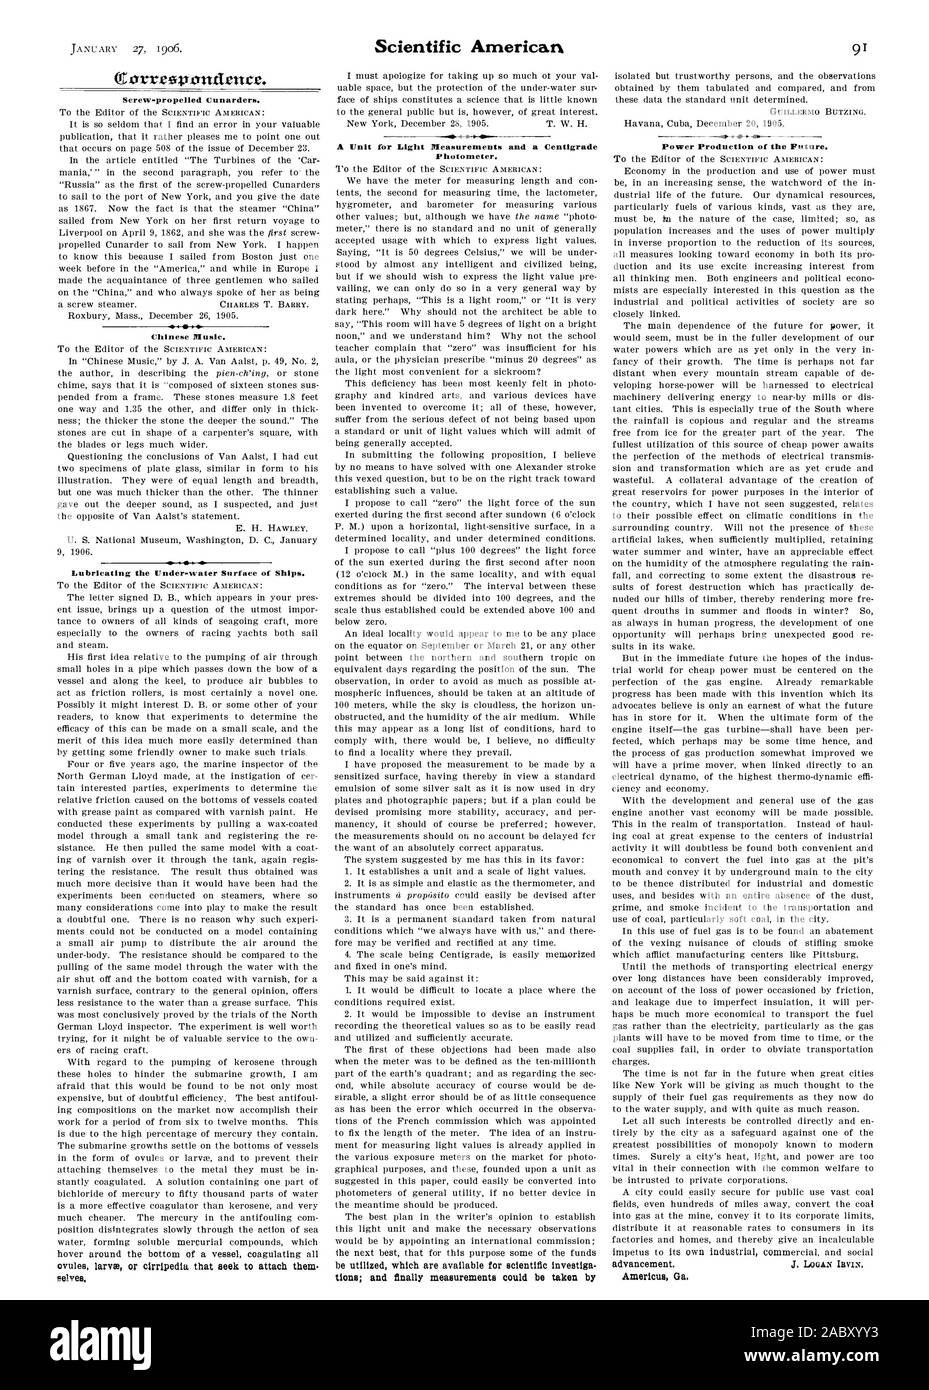 Screw-propelled Cunarders. Chinese Music. ovules larval or cirripedia that seek to attach them selves Photometer. be utilized which are available for scientific investiga tions; and finally measurements could be taken by Power Production of the Future. Americus Ga., scientific american, 1906-01-27 Stock Photo